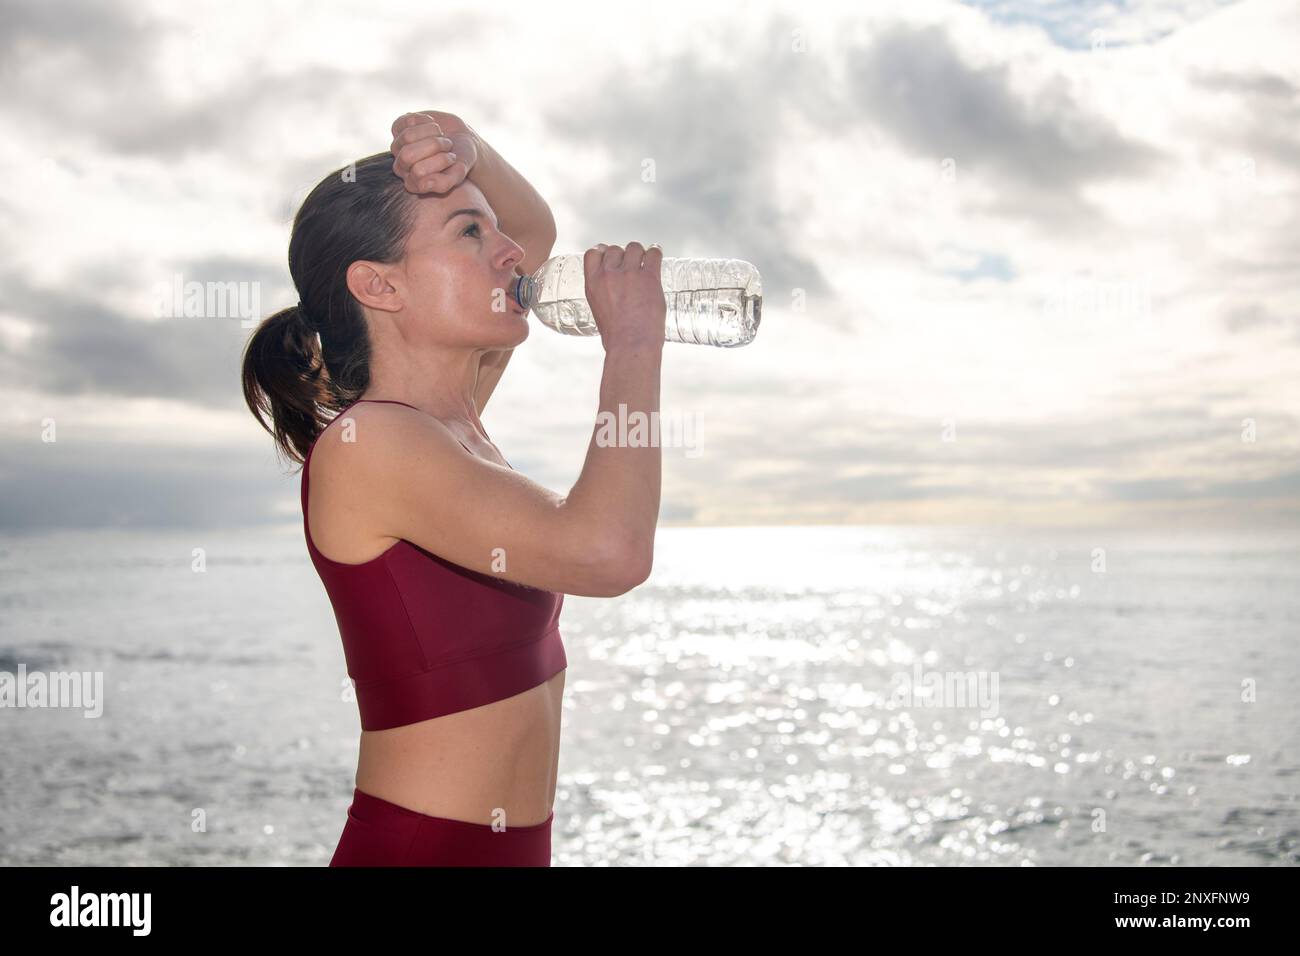 Sporty female taking a drink of water from a bottle after taining or running outside by the ocean Stock Photo